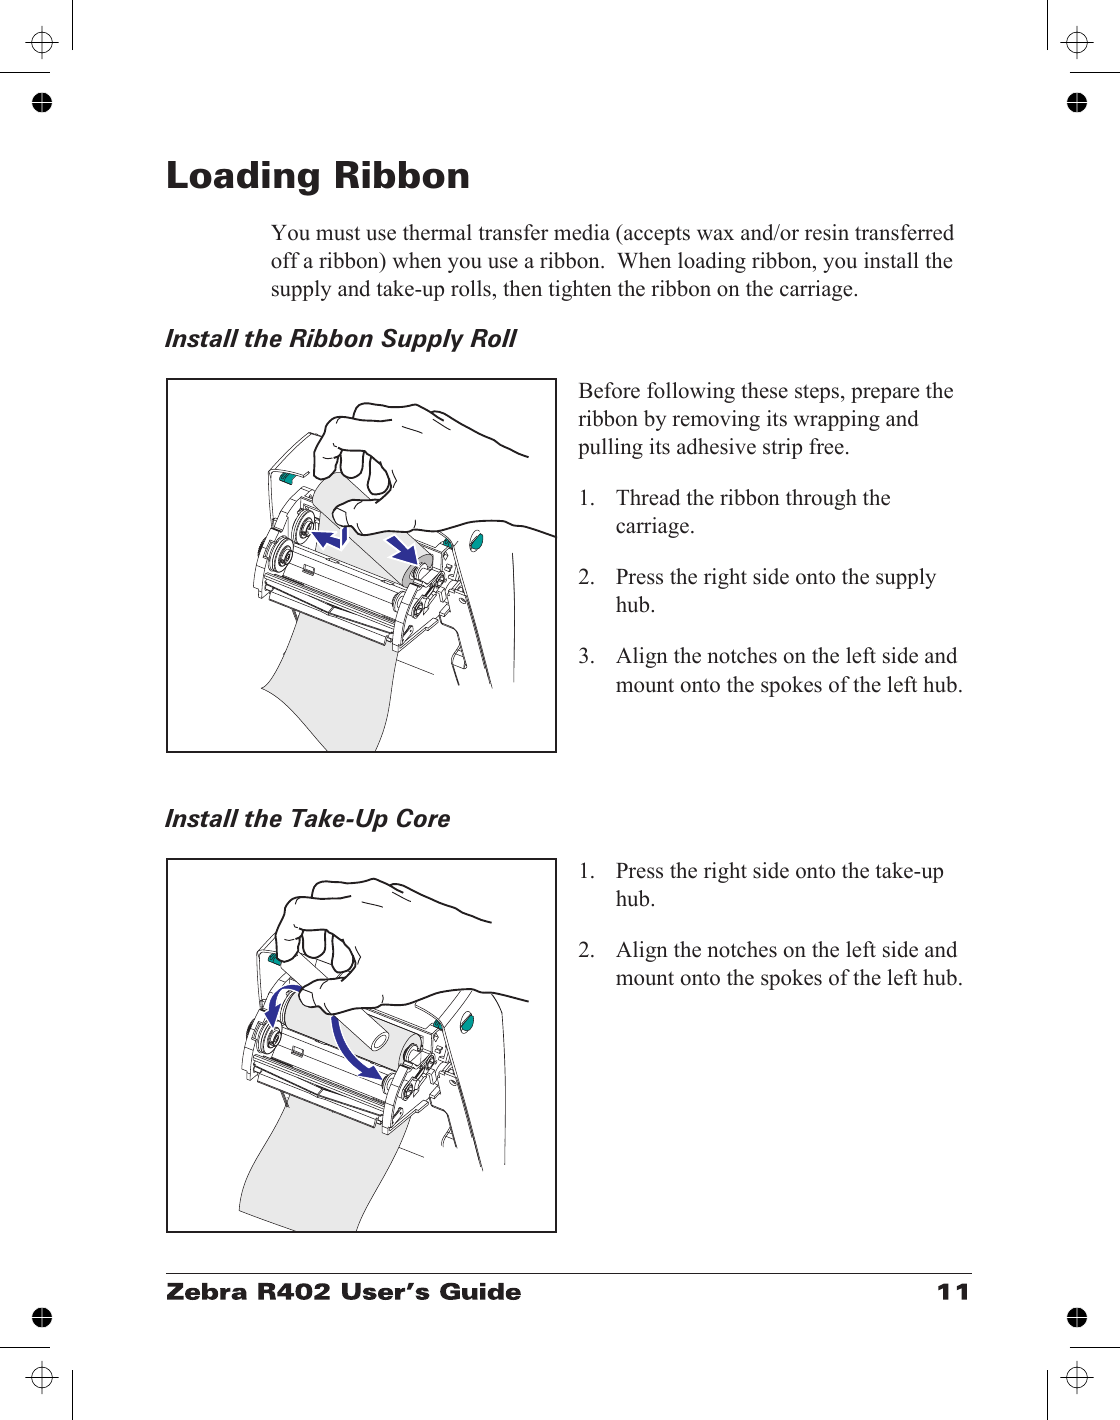 Loading RibbonYou must use thermal transfer media (accepts wax and/or resin transferredoff a ribbon) when you use a ribbon.  When loading ribbon, you install thesupply and take-up rolls, then tighten the ribbon on the carriage.Install the Ribbon Supply RollBefore following these steps, prepare theribbon by removing its wrapping andpulling its adhesive strip free.1. Thread the ribbon through thecarriage.2. Press the right side onto the supplyhub.3. Align the notches on the left side andmount onto the spokes of the left hub.Install the Take-Up Core1. Press the right side onto the take-uphub.2. Align the notches on the left side andmount onto the spokes of the left hub.